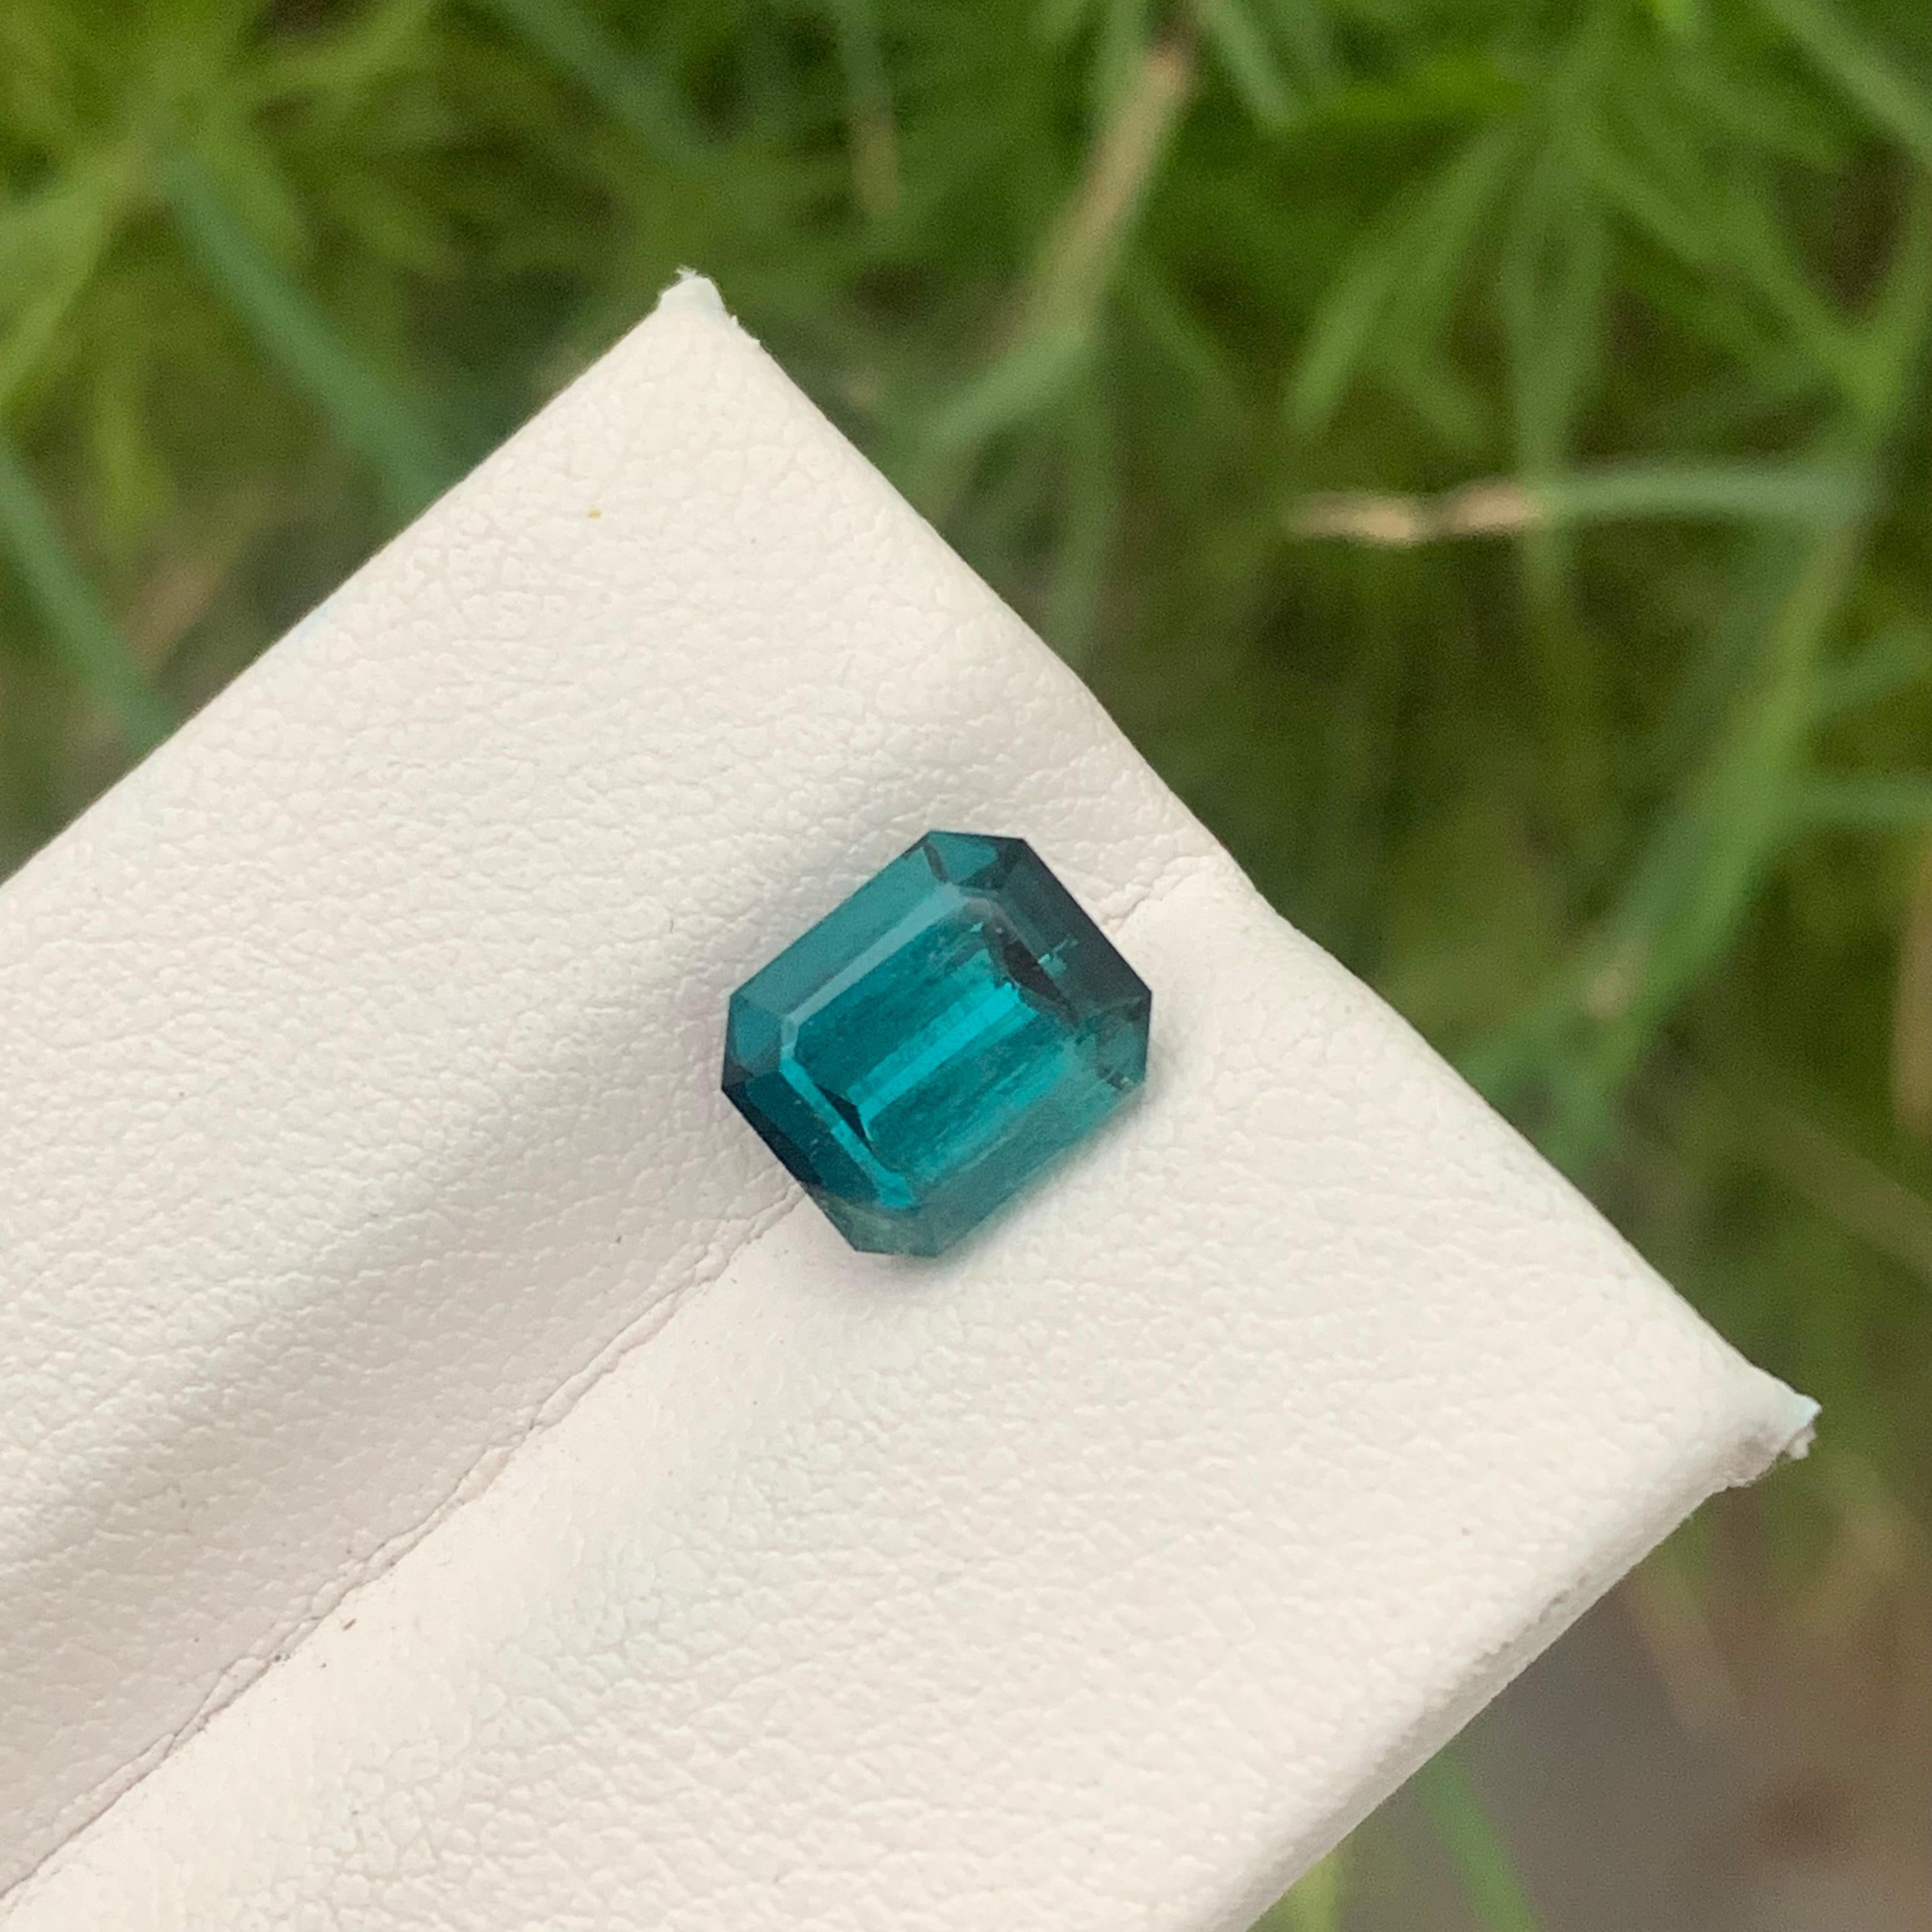 2.75 Carat Included Natural Loose Indicolite Tourmaline Emerald Cut Ring Gem For Sale 1